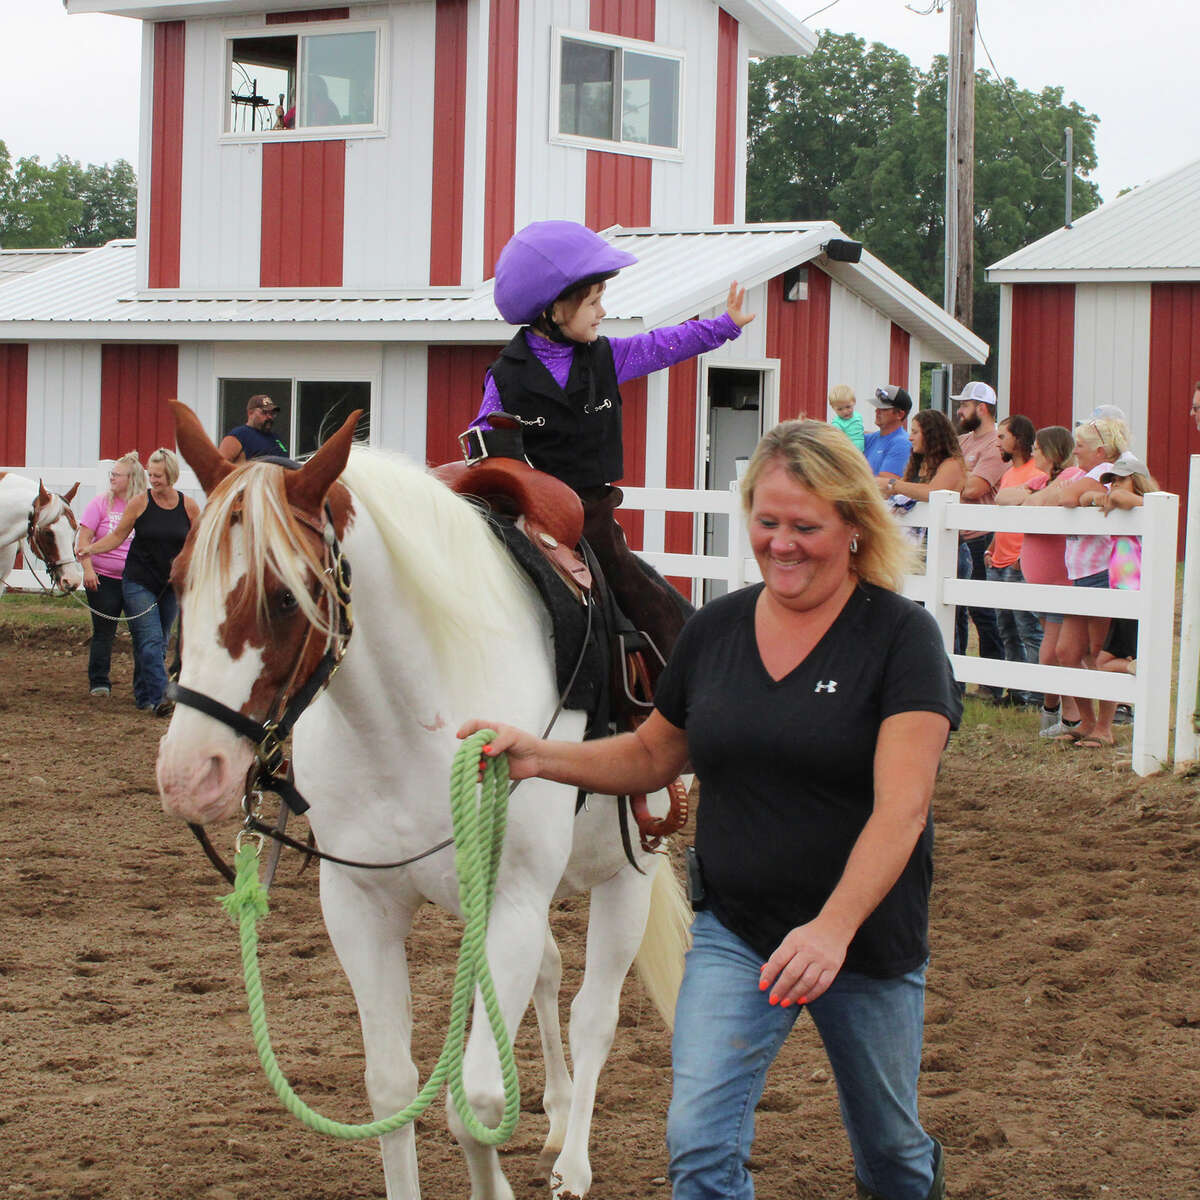 Children as young as 2 years old showed how they handle horses and ponies more than twice their size during the Cloverbud and PeeWee classes Saturday morning to close out the Mecosta County Free Fair.